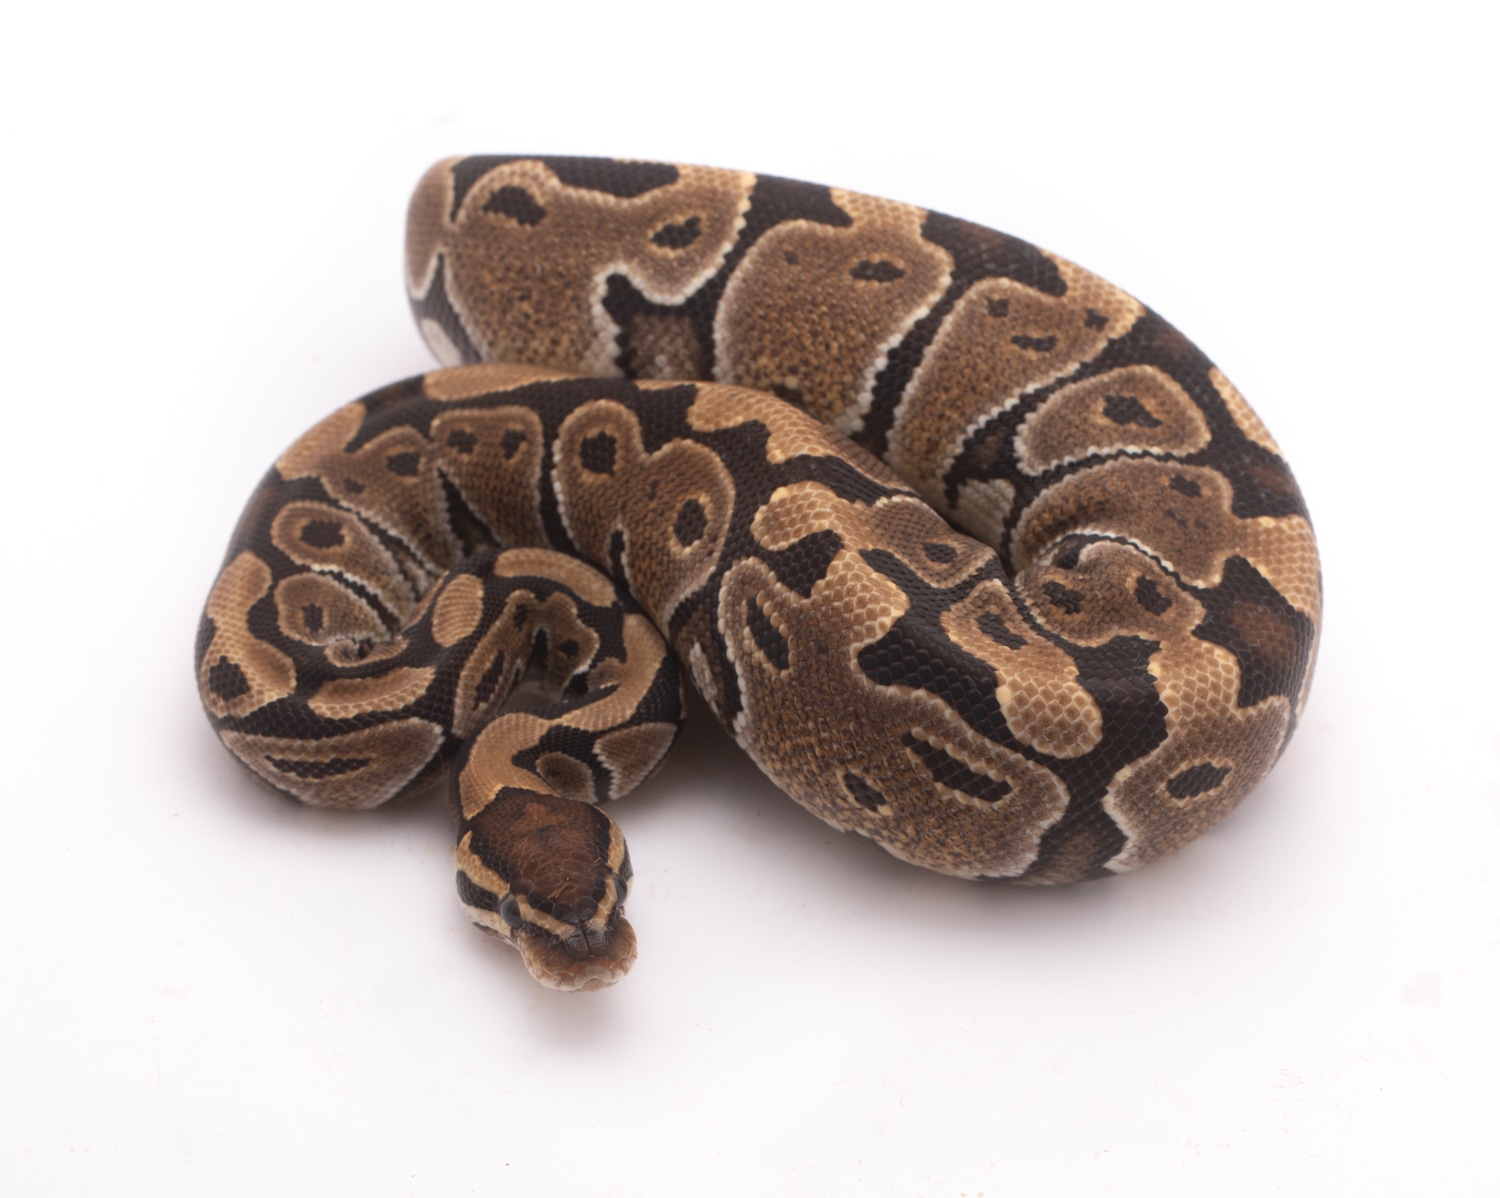 Special Ball Python by Custom Scales